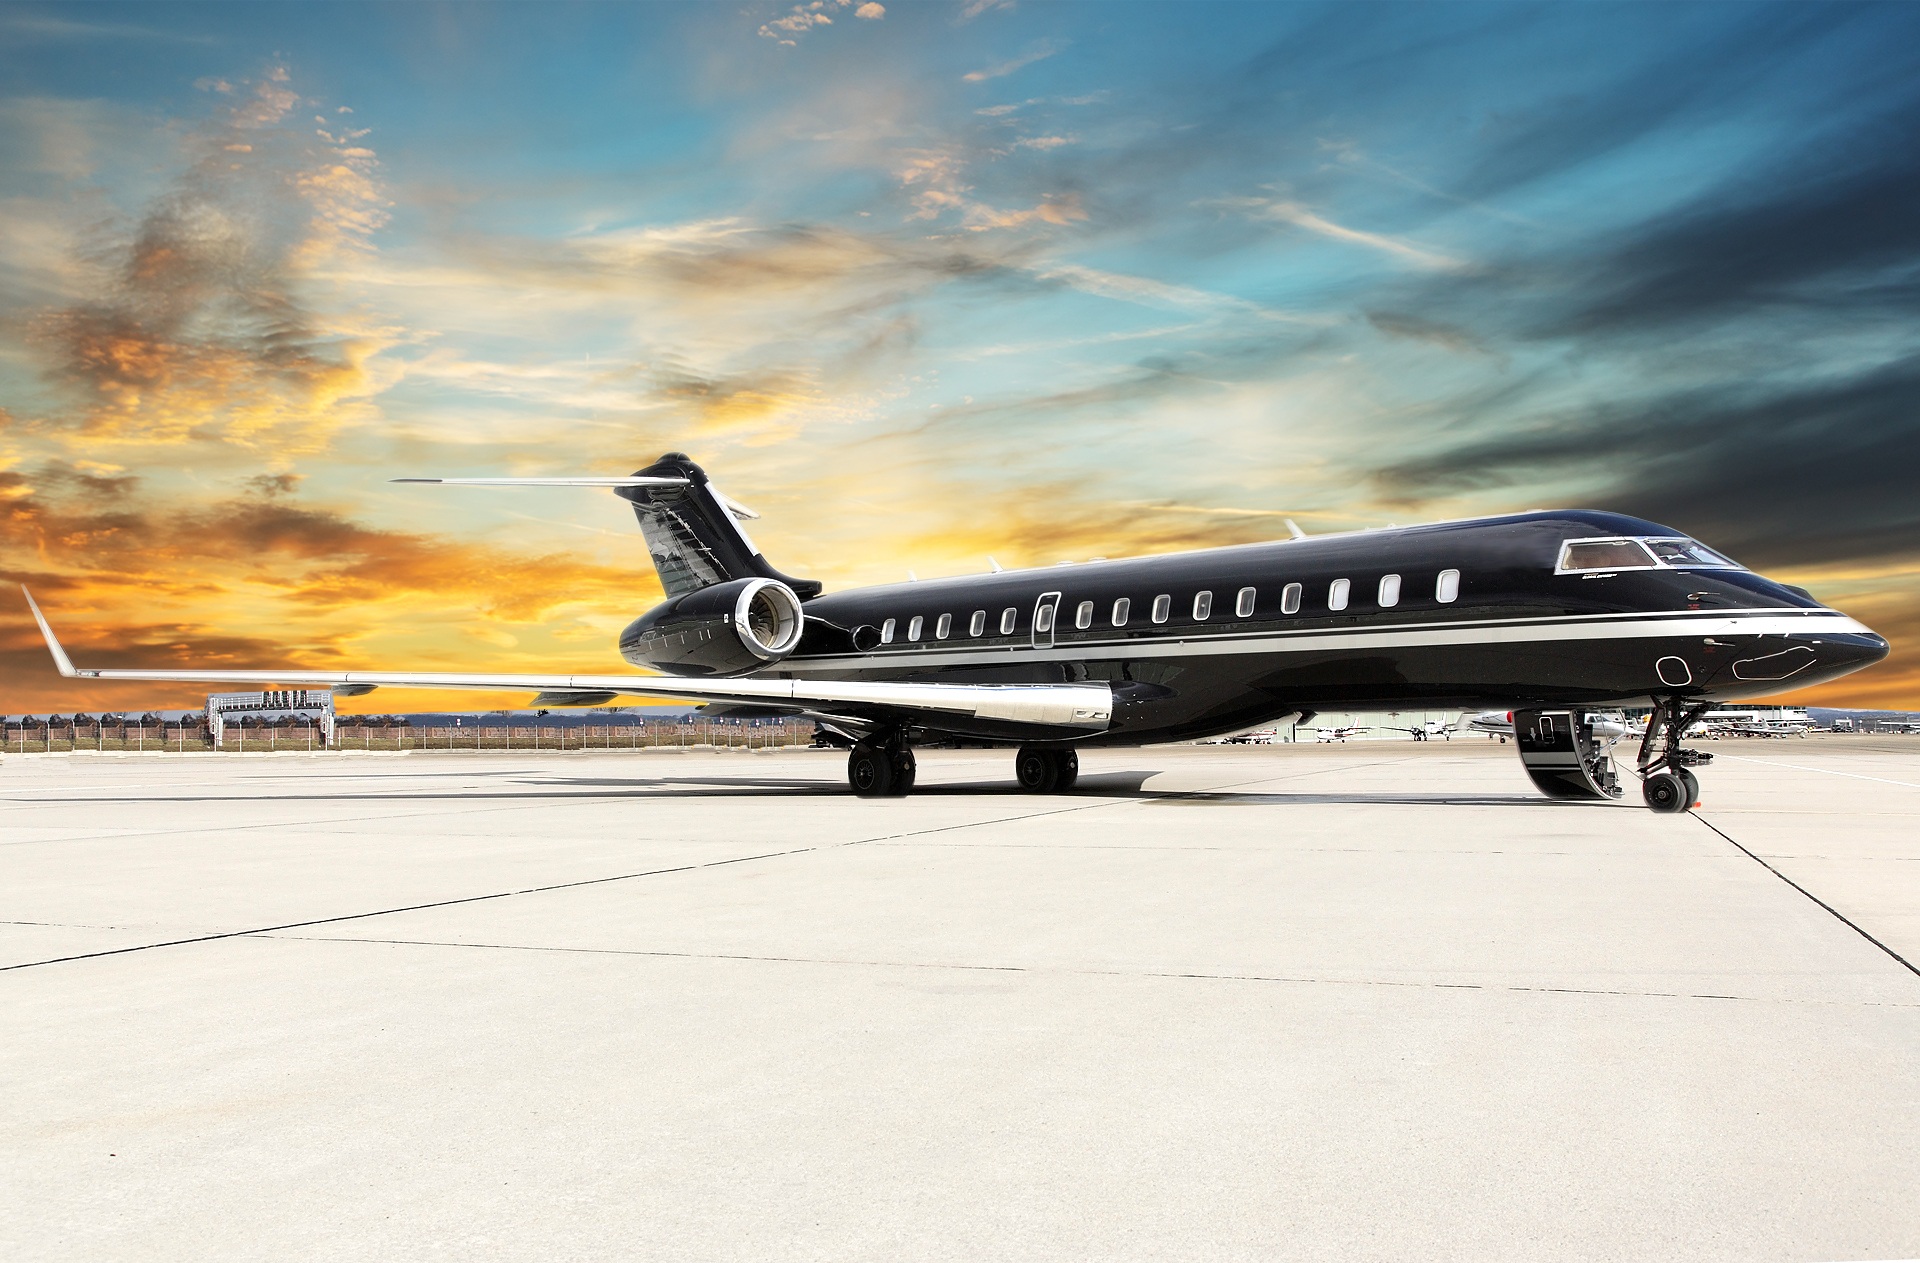 Global Express, SN 9005 For Sale